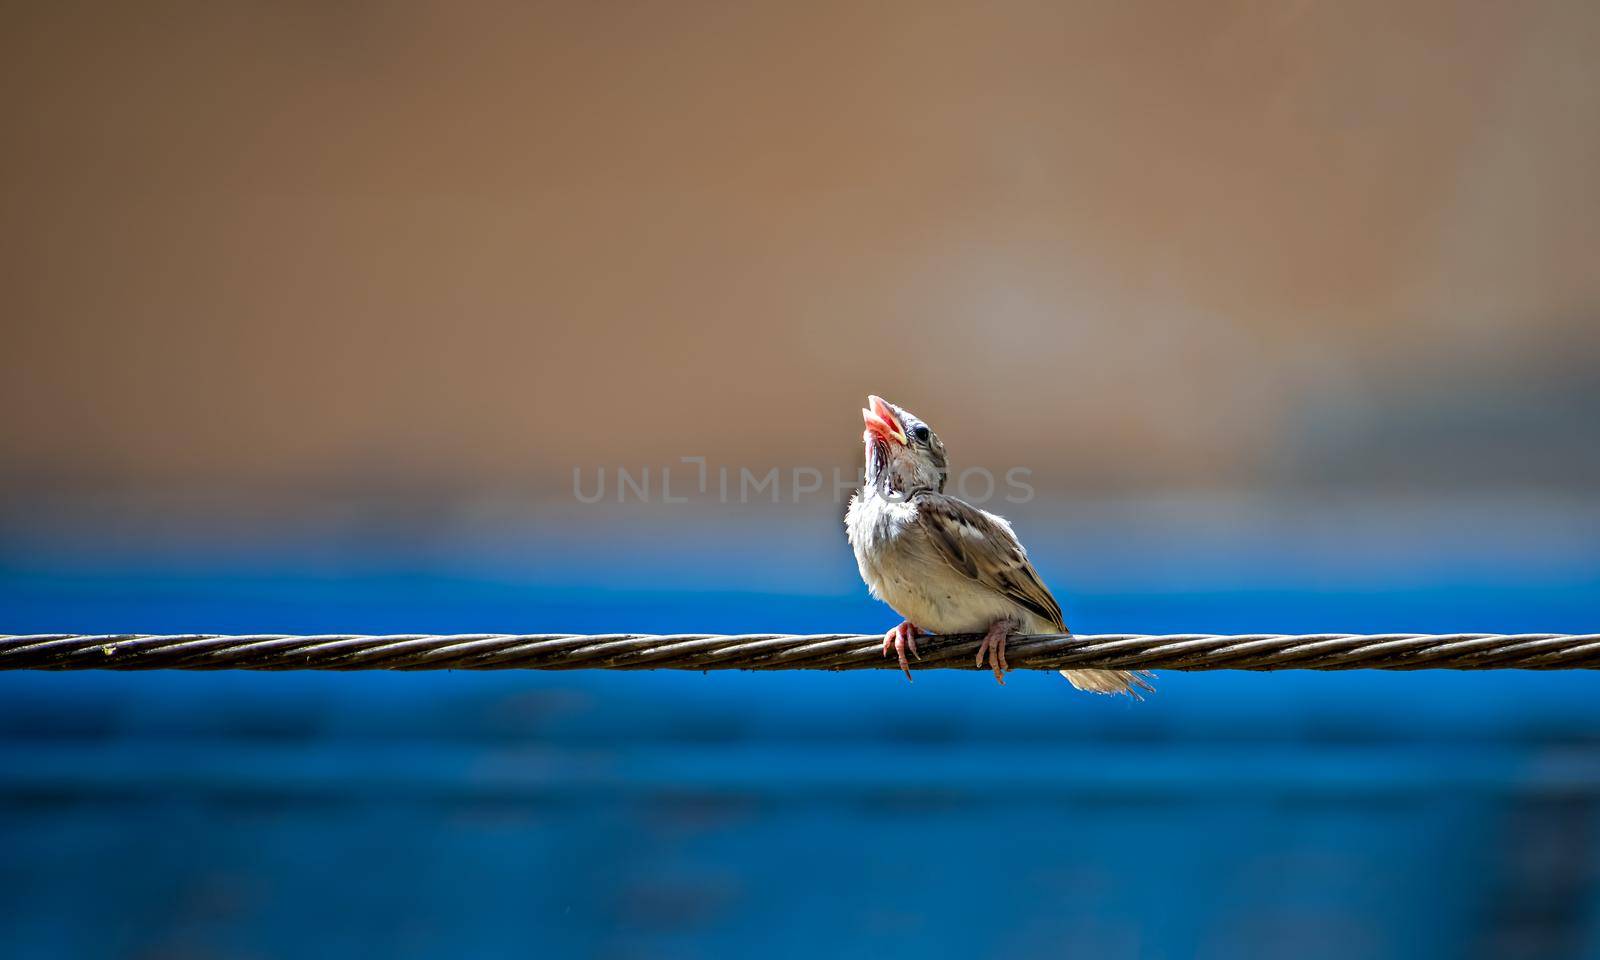 Newly born, hungry baby sparrow barely balancing on wire and awaiting for food from parents.